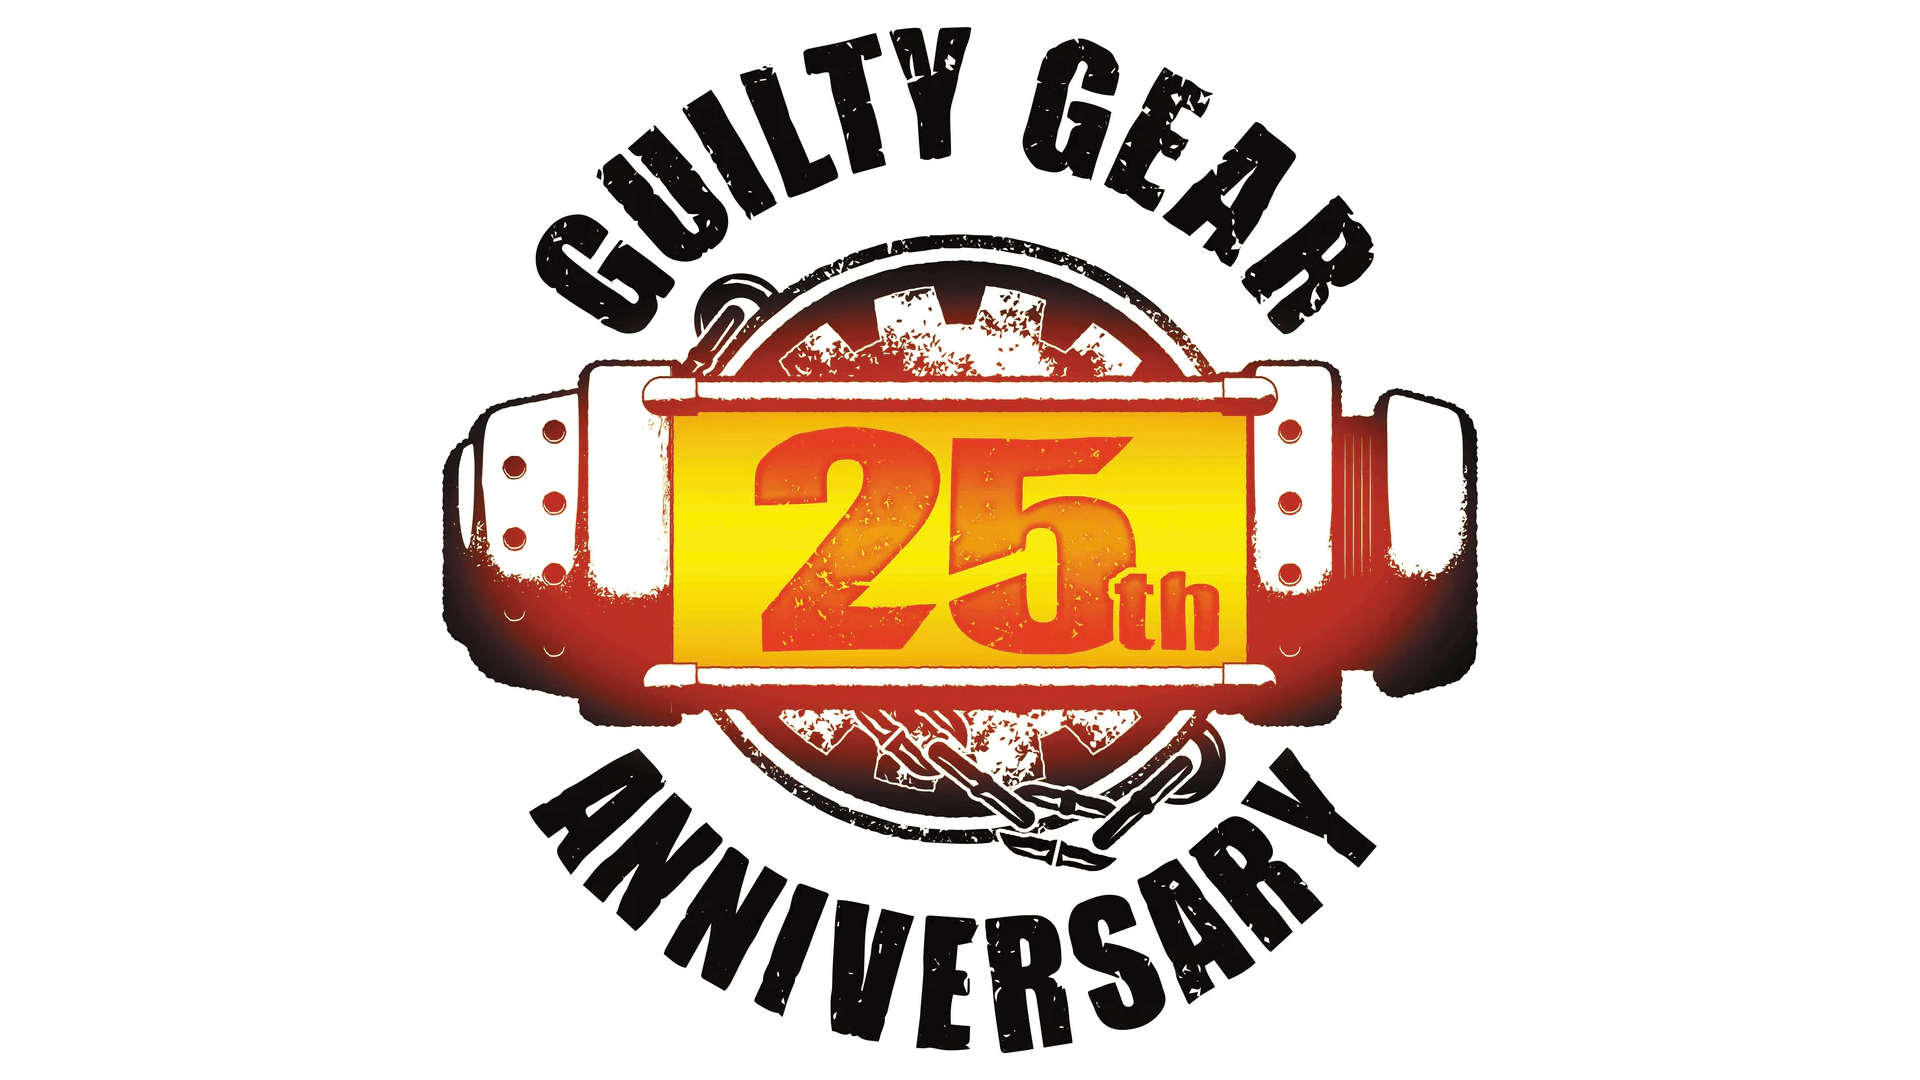 Pre-orders For Guilty Gear 25th Anniversary Edition Go Live